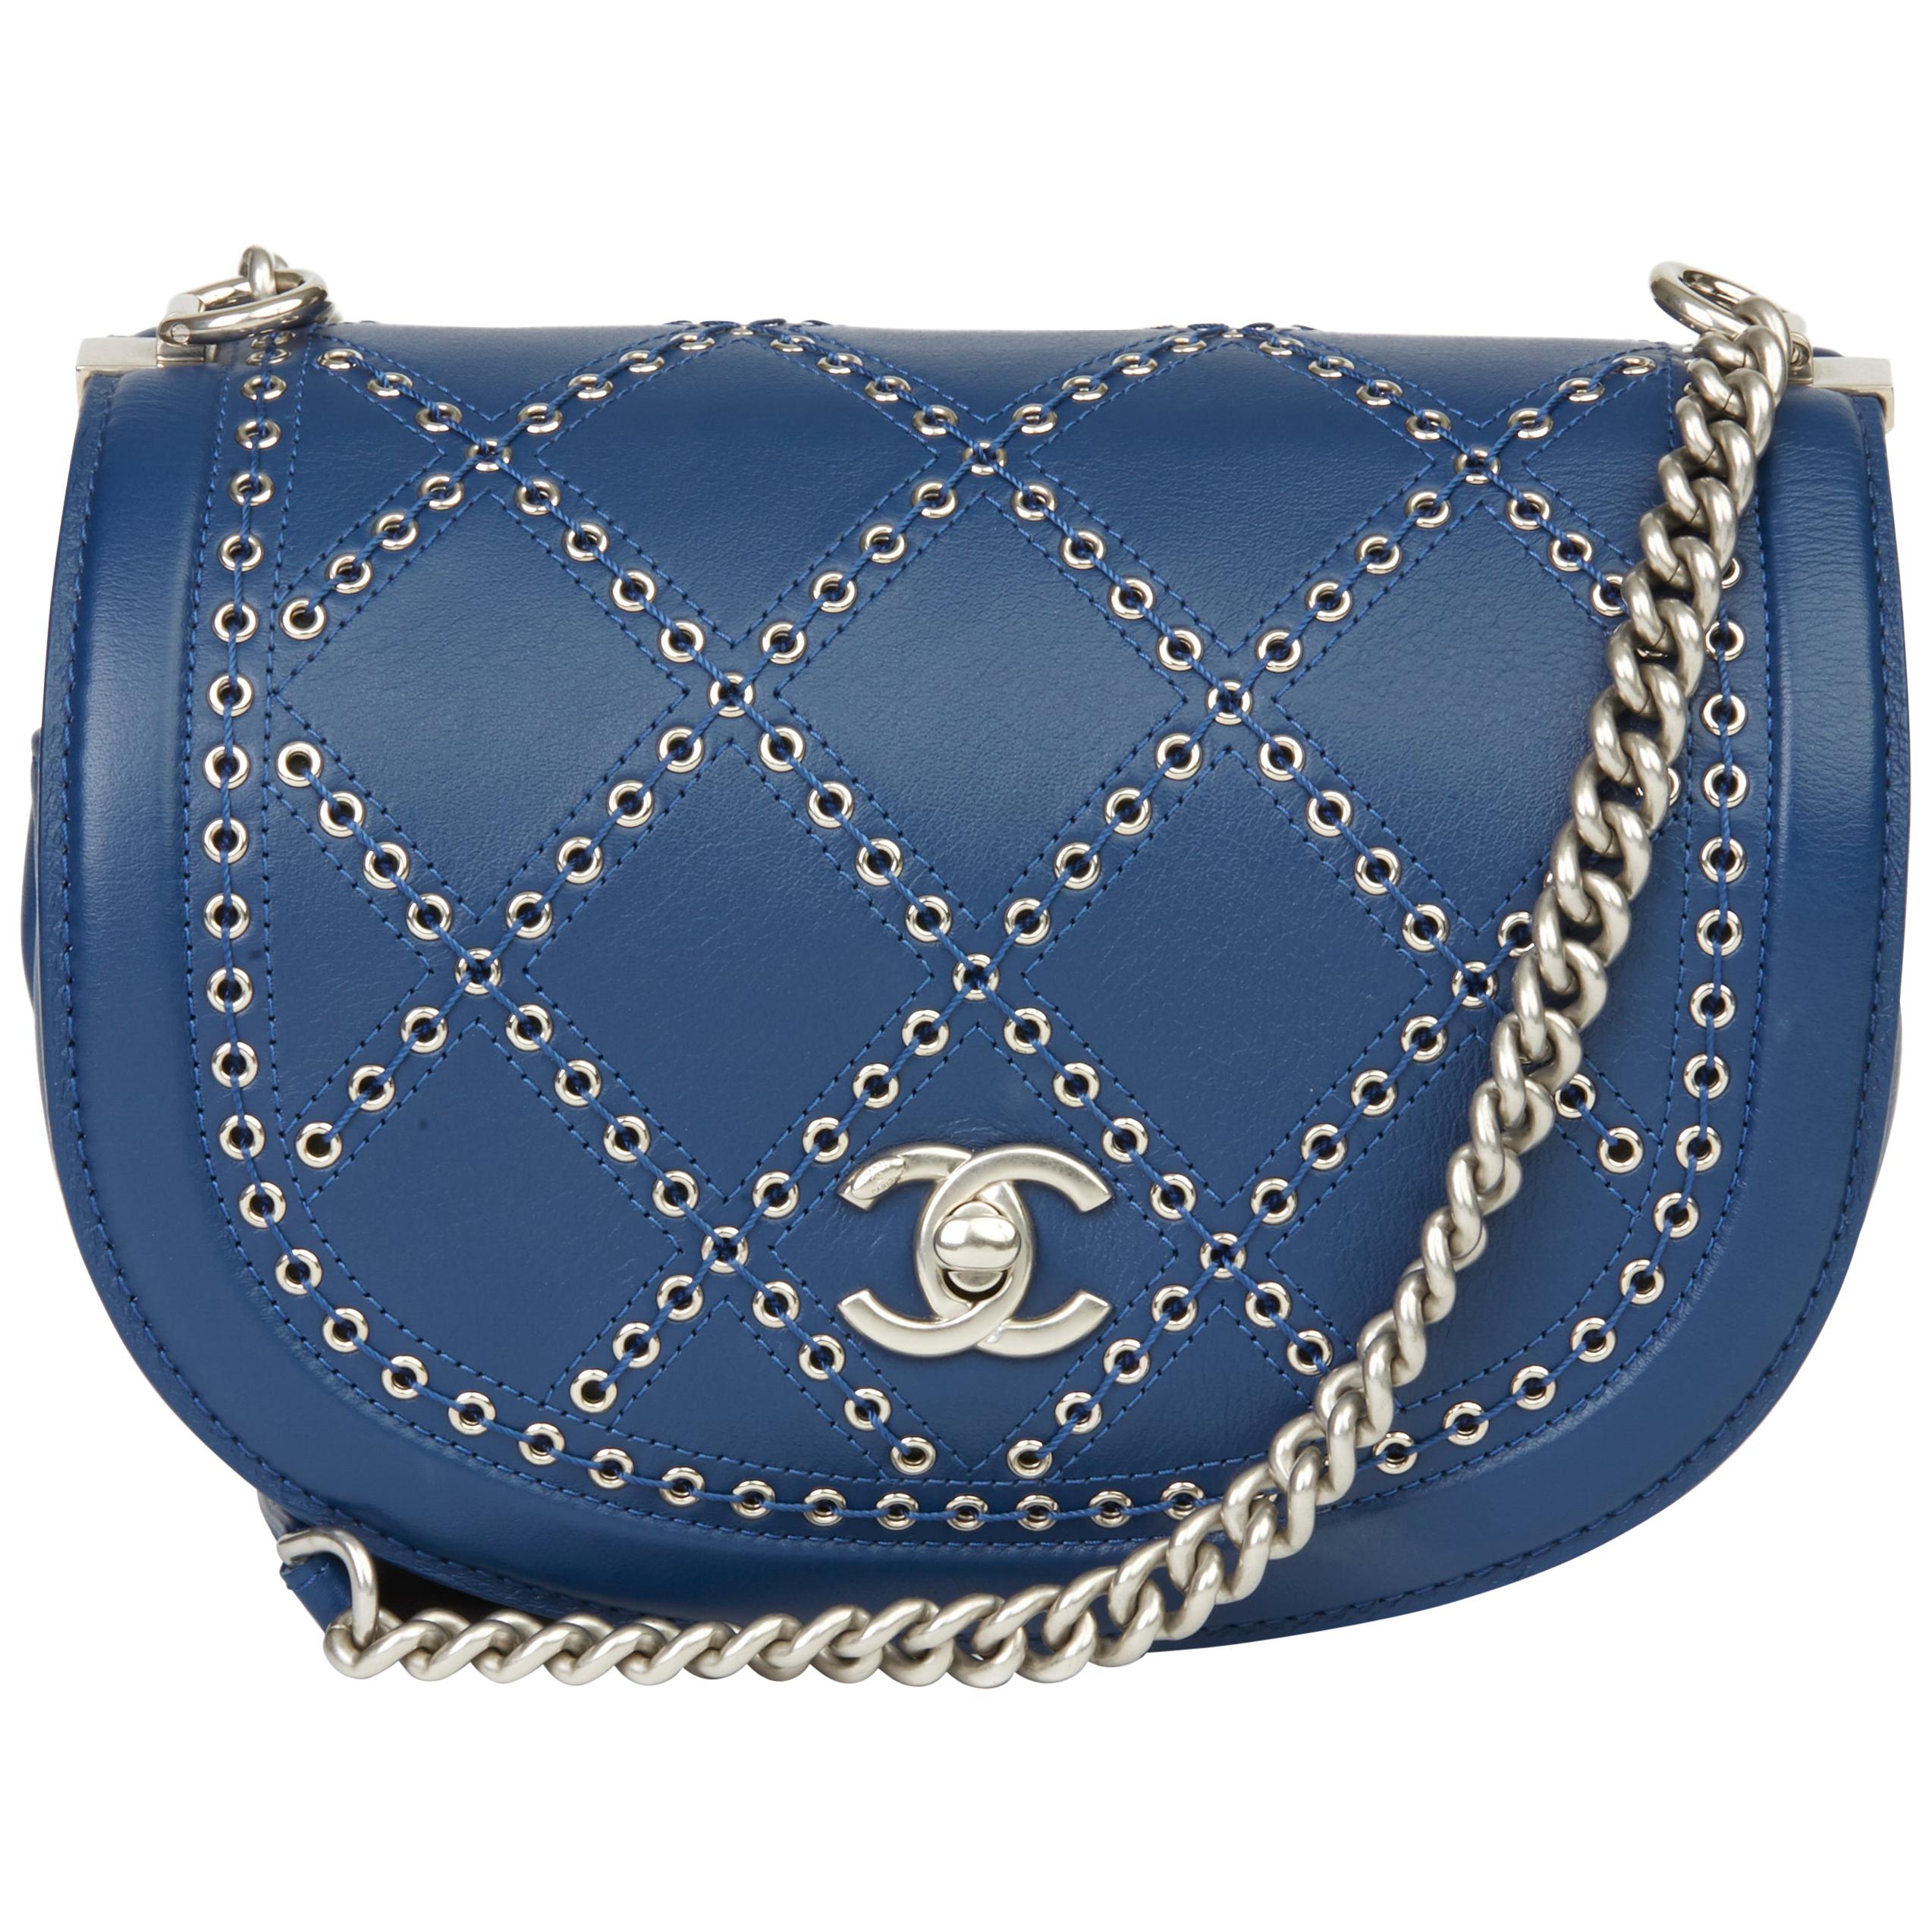 2018 Chanel Blue Quilted Calfskin Coco Eyelets Round Flap Bag at